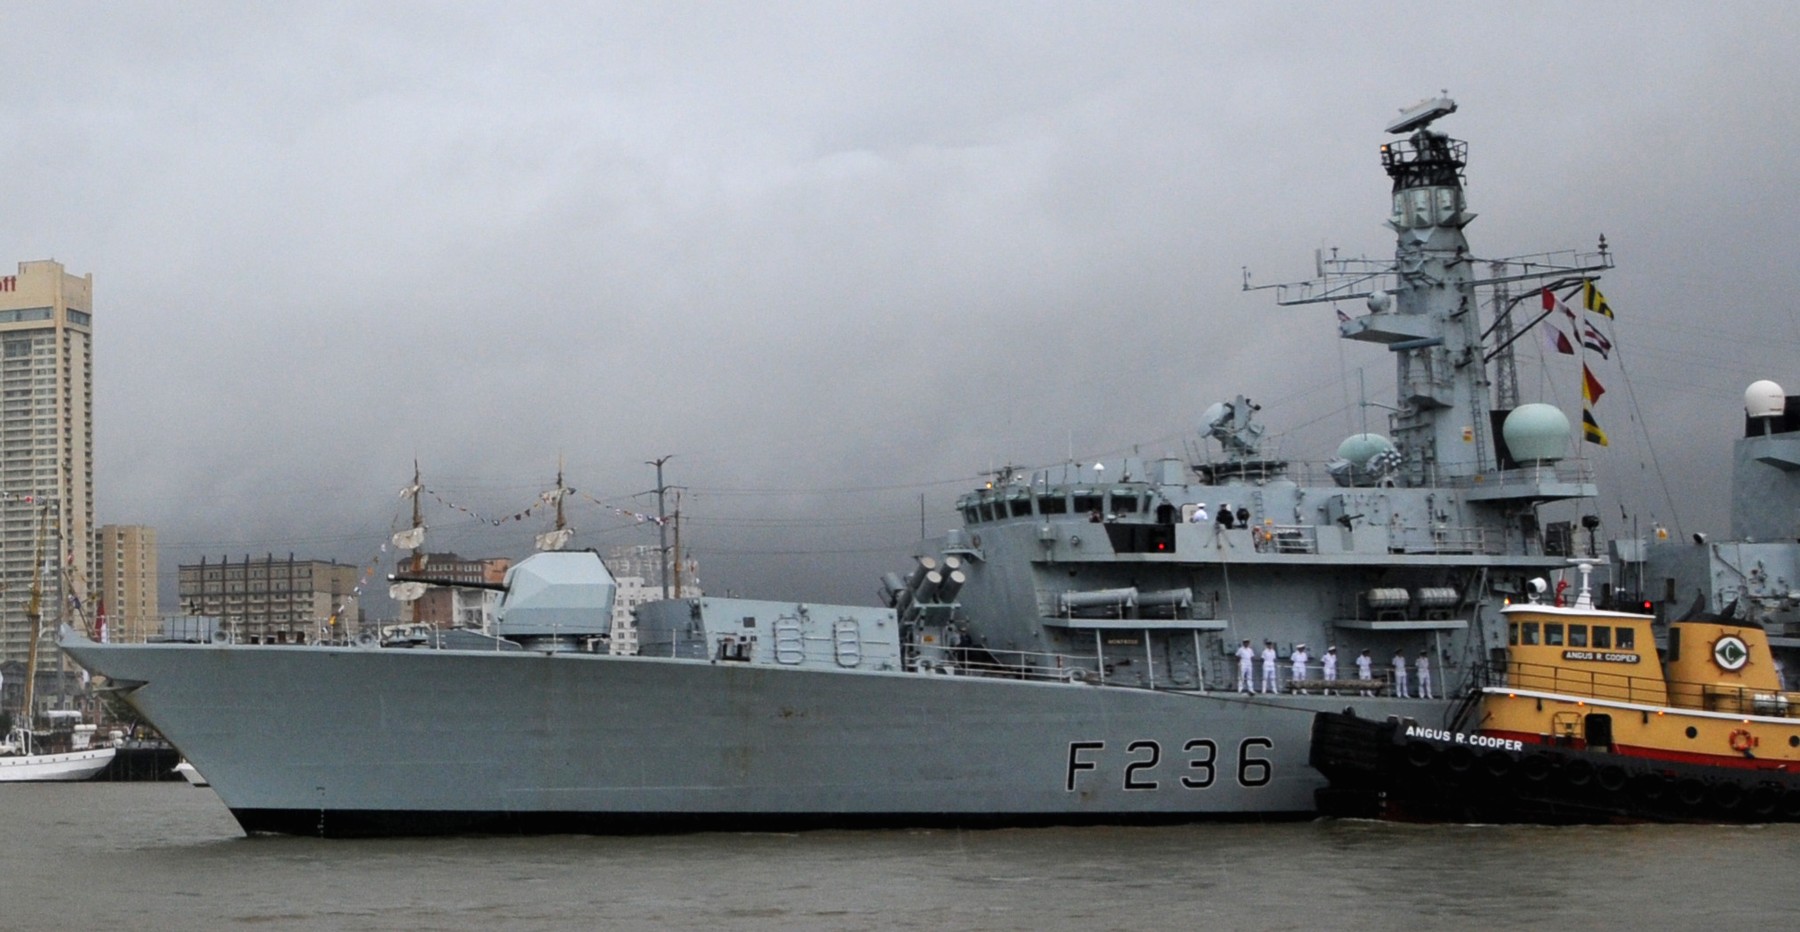 hms montrose f-236 type 23 duke class guided missile frigate royal navy 15